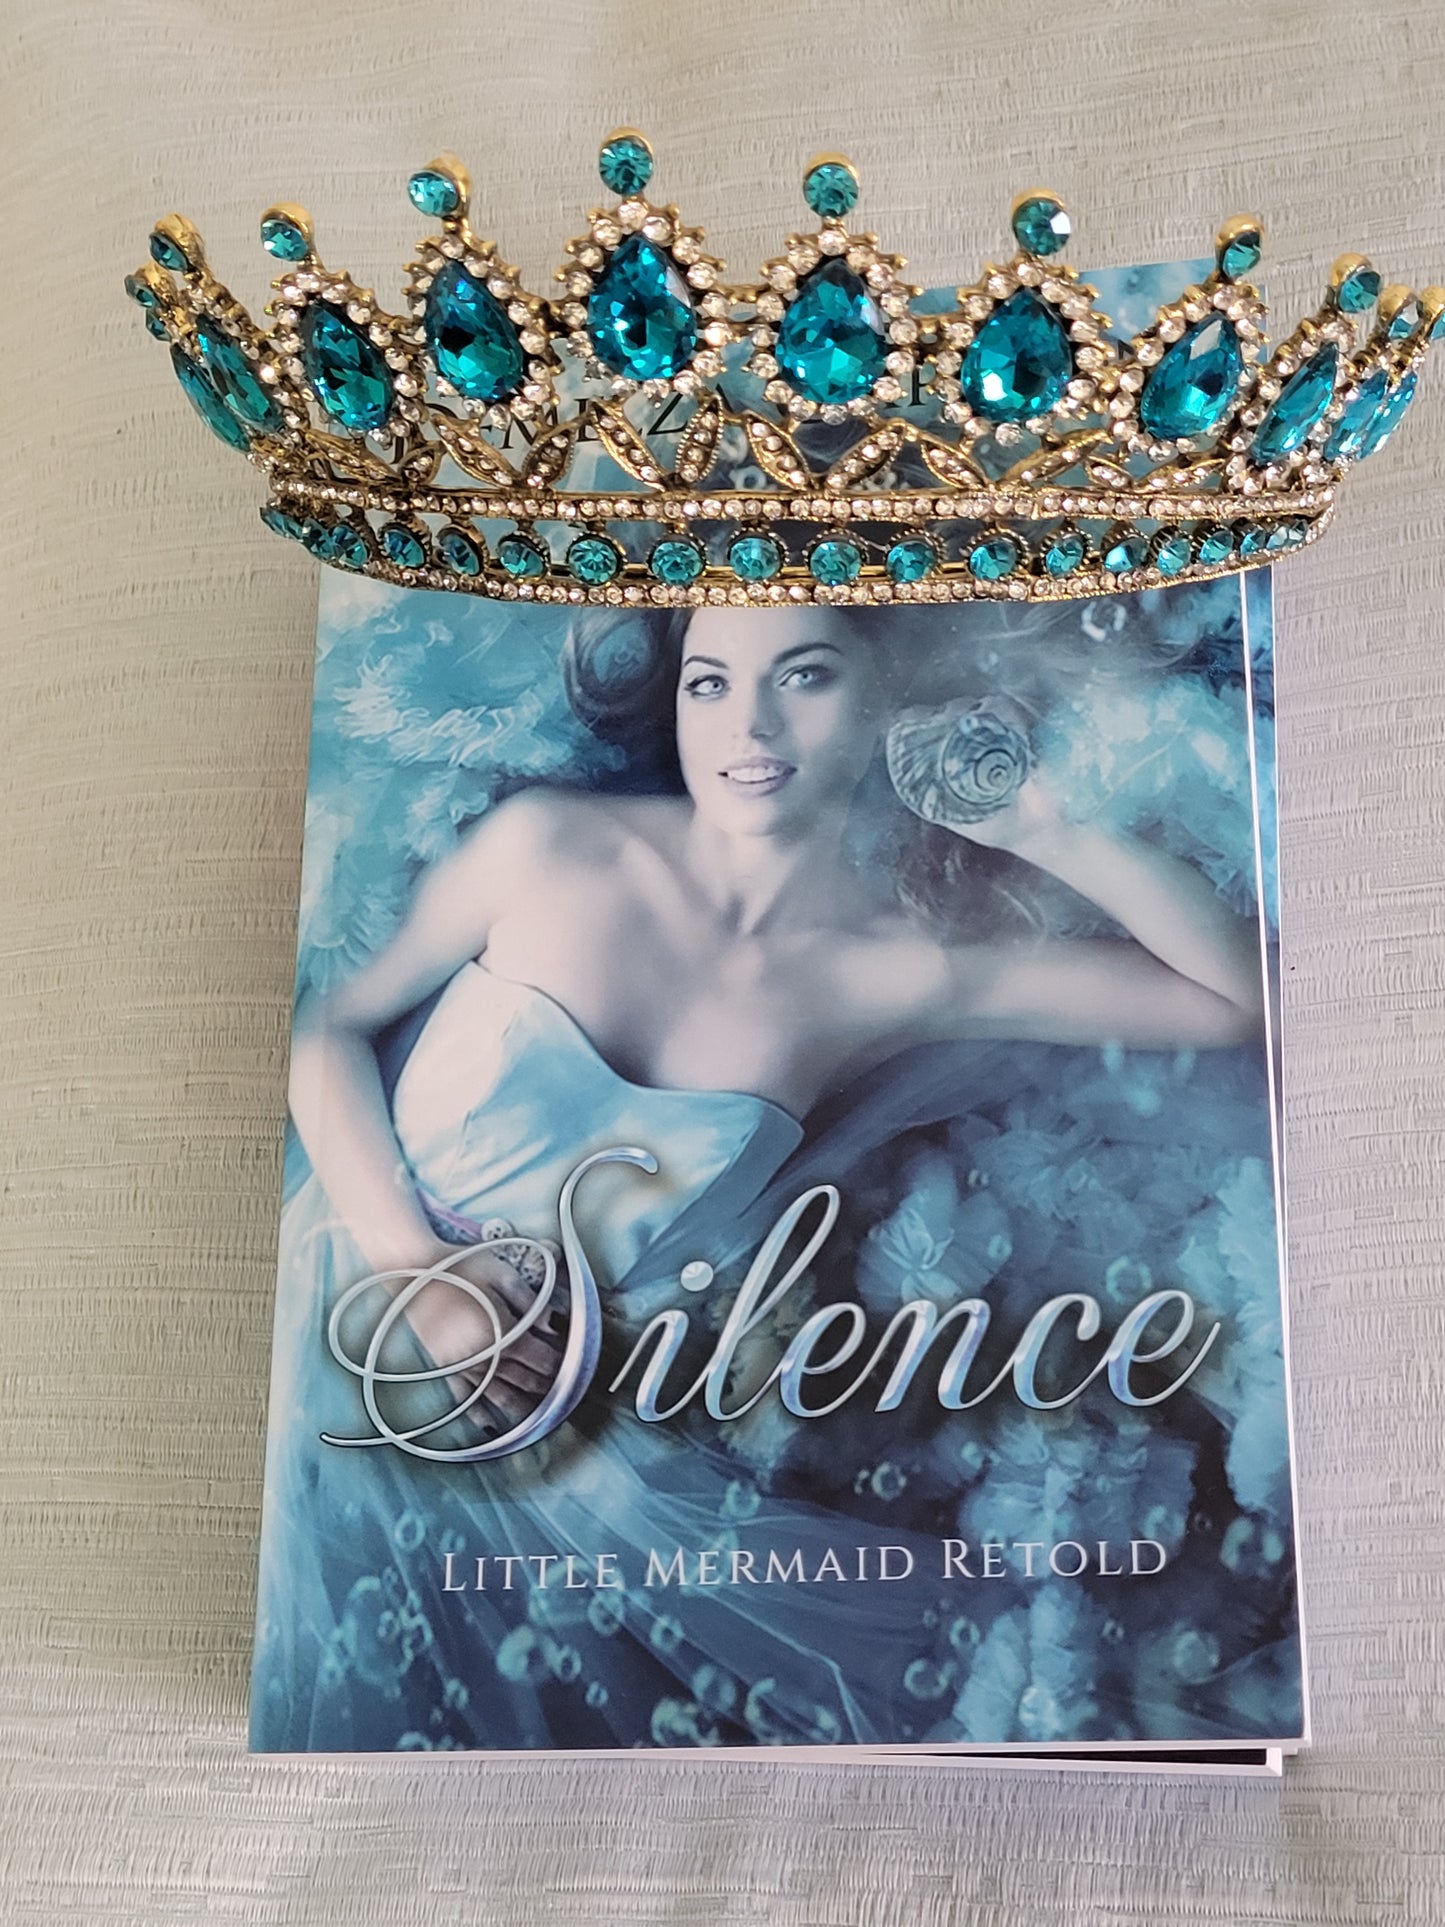 A steamy romantasy fairytale retelling of the Little Mermaid for fans of Sarah J Maas, ACOTAR, Raven Kennedy, Charlaine Harris, Juliet Marillier and Rebecca Yarros